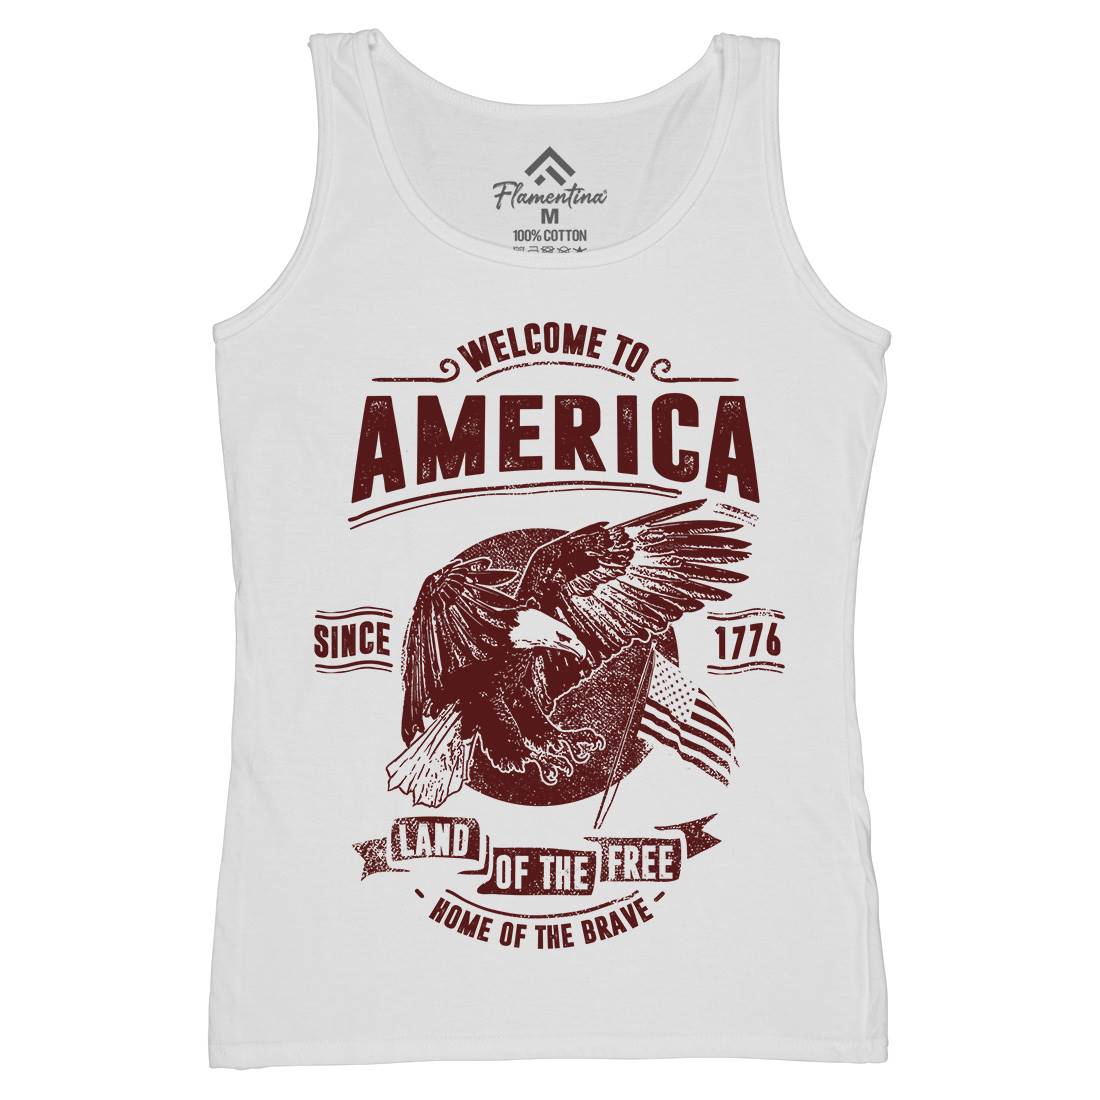 Welcome To America Womens Organic Tank Top Vest American C994